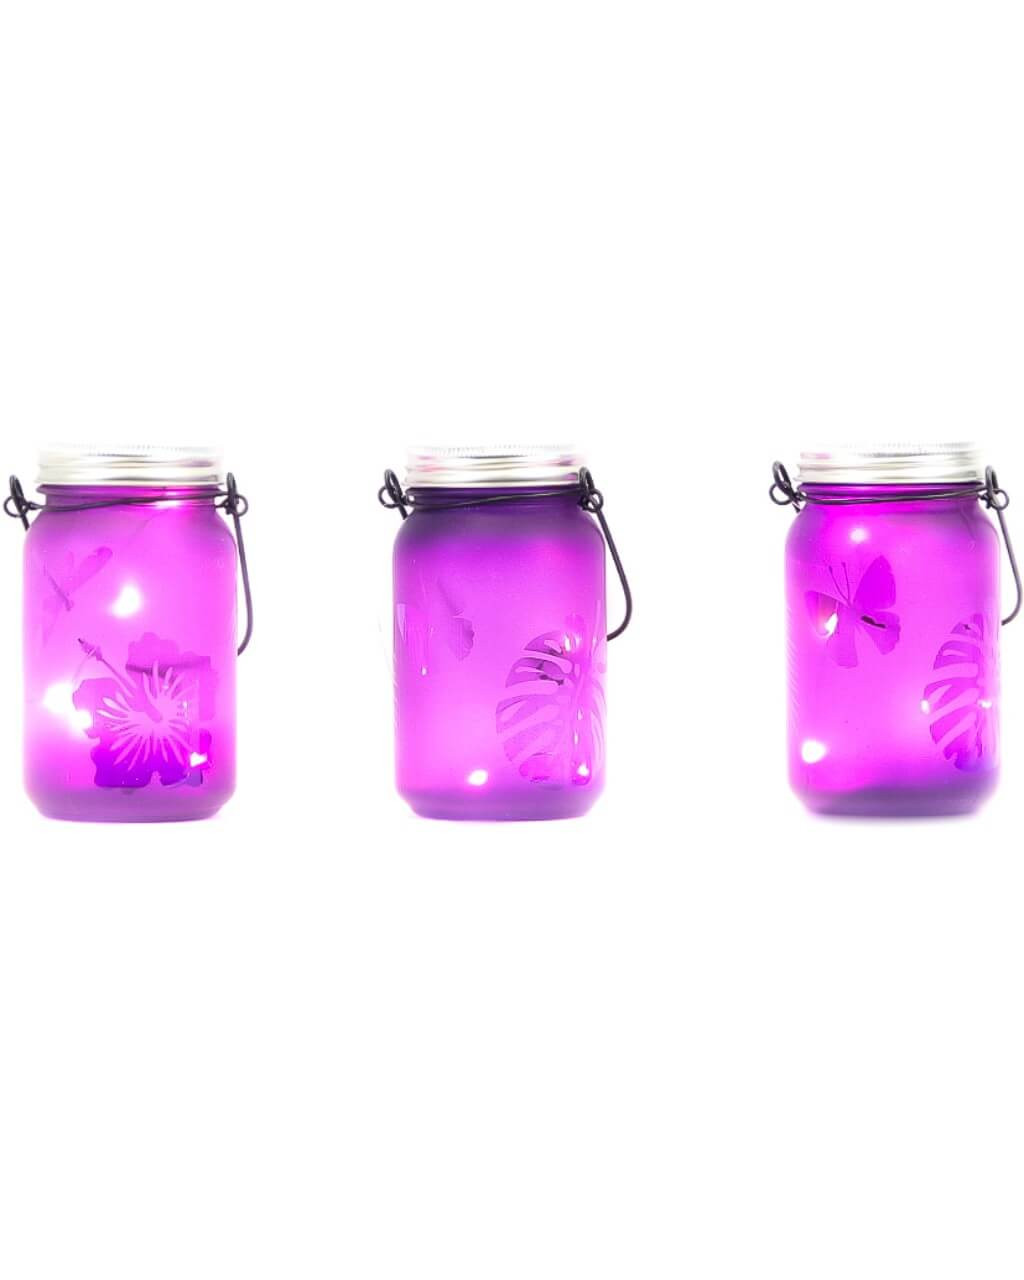 3”D x 5.5”H LED Purple Indoor/Outdoor Frosted Mason Jar - Set of 3